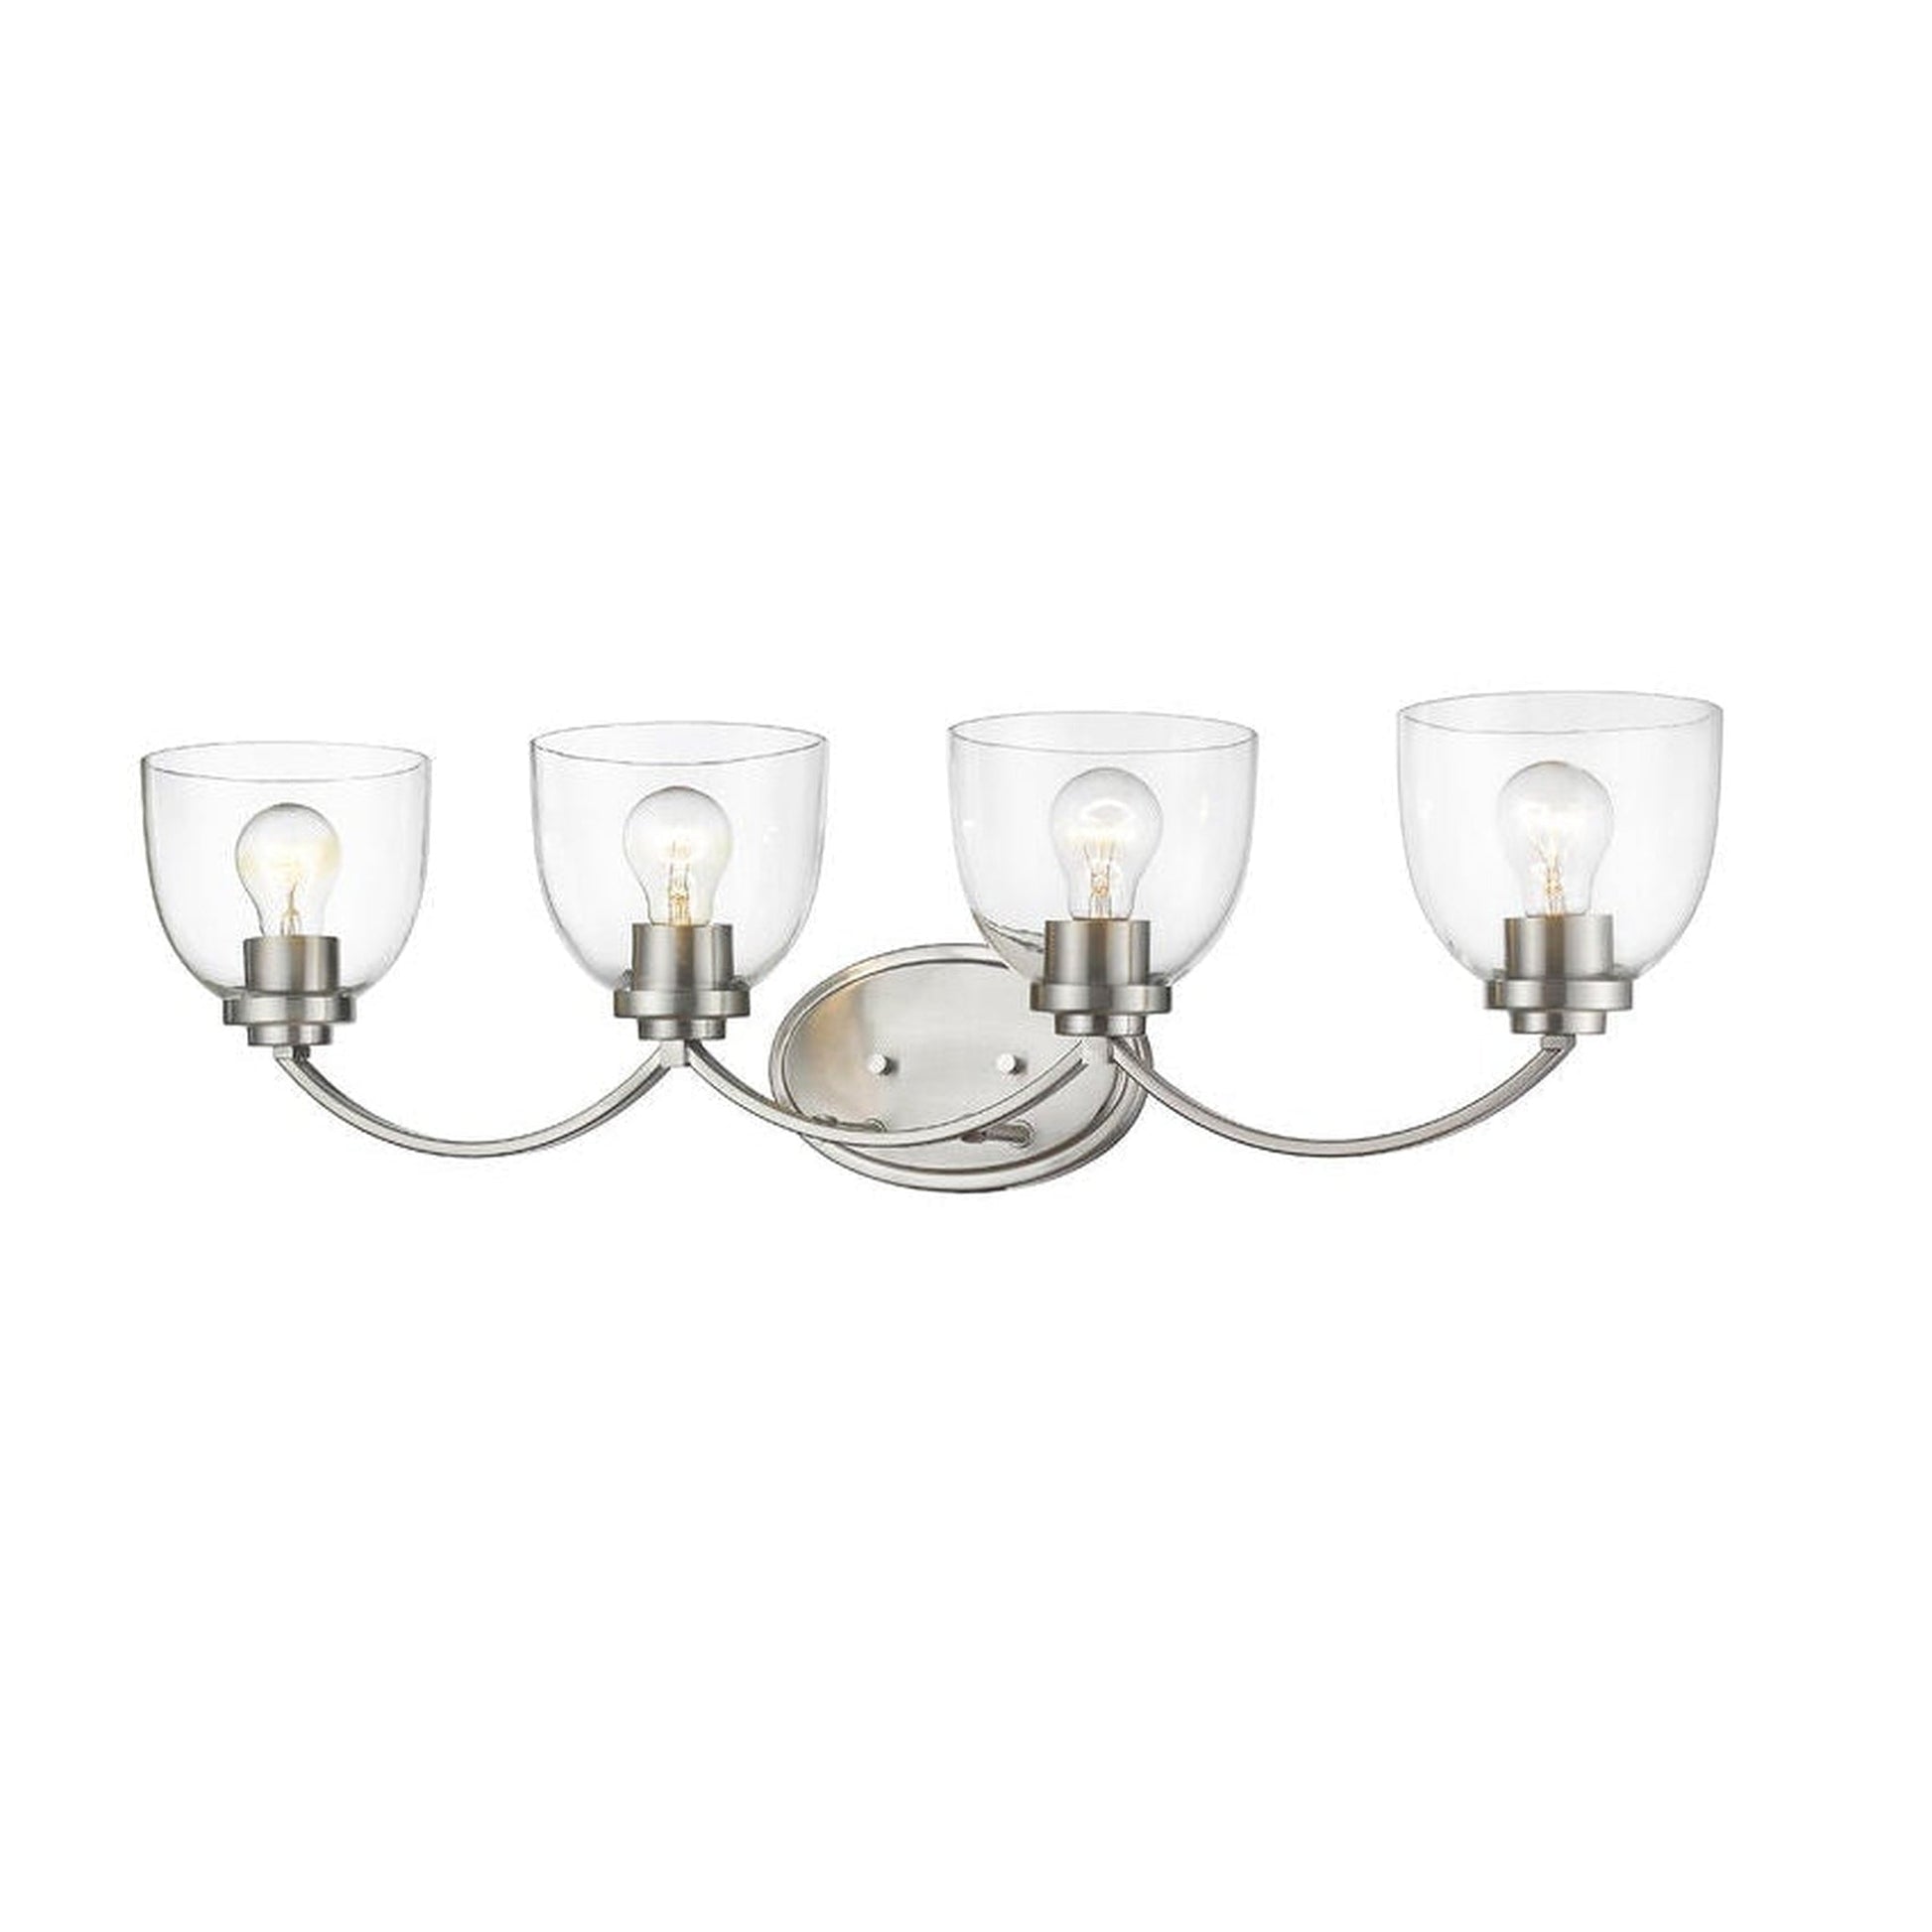 Z-Lite Ashton 32" 4-Light Brushed Nickel Vanity Light With Clear Glass Shade